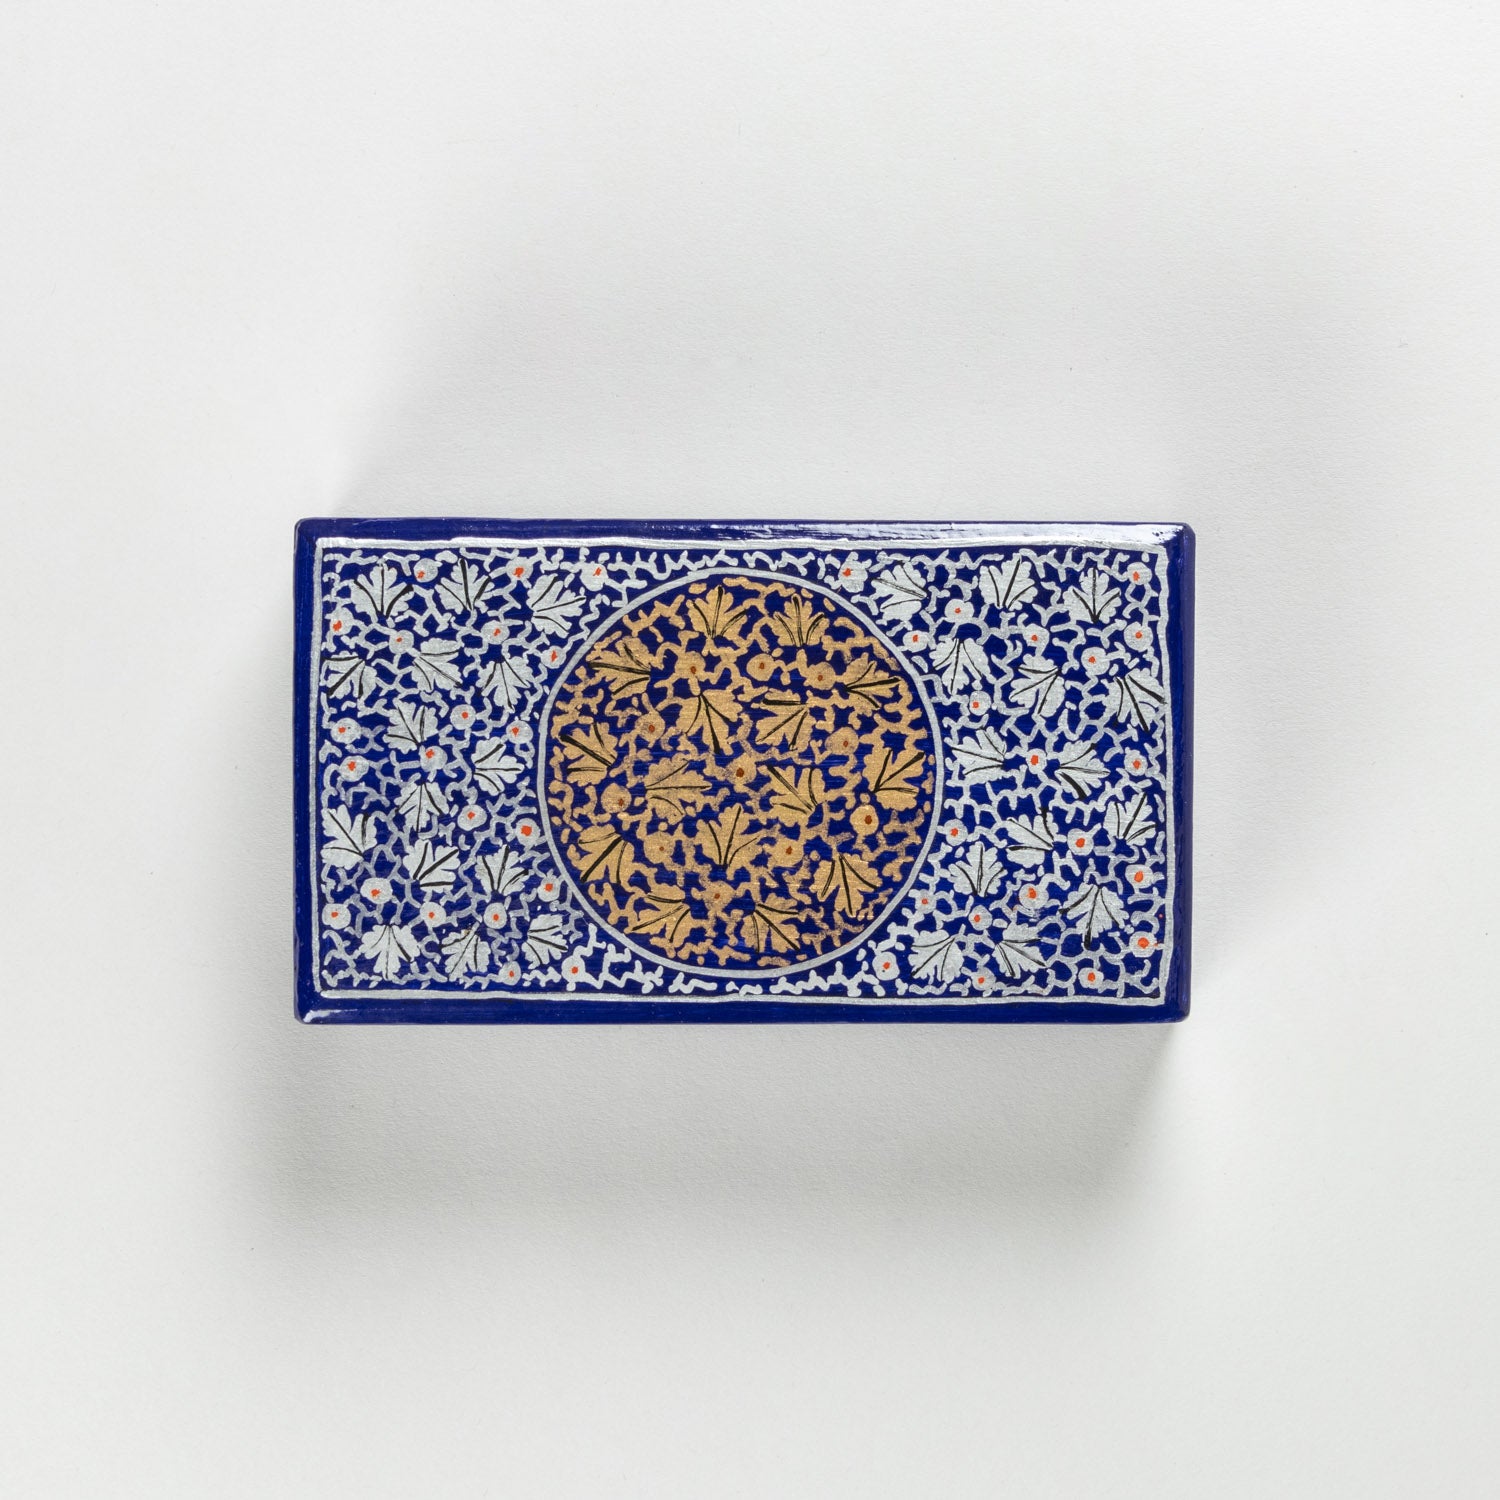 Hand Painted Papier Mache Box in Blue & Silver Chinar - 4x7